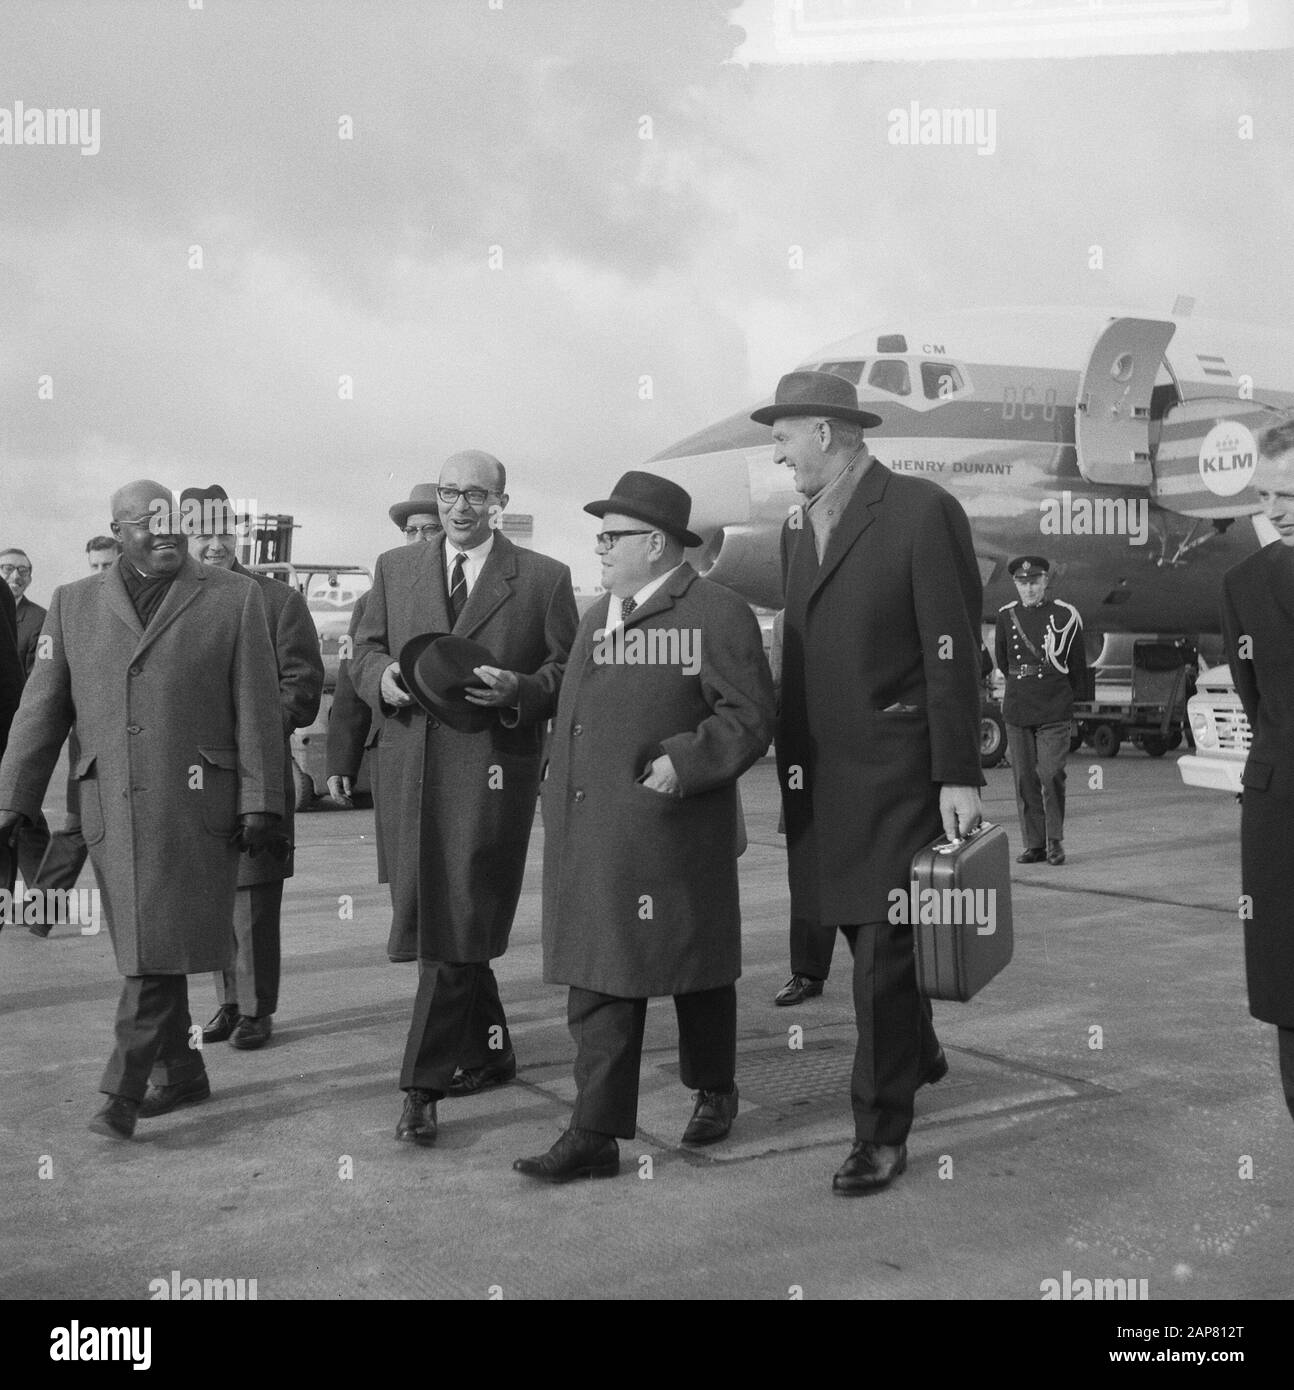 Arrival of mr. De Vries, the newly appointed governor of Suriname at Schiphol Airport. He will be sworn in in the Netherlands. Reception on the platform Date: 15 February 1965 Location: Noord-Holland, Schiphol Keywords: arrivals, governors, overseas territories, airports Stock Photo